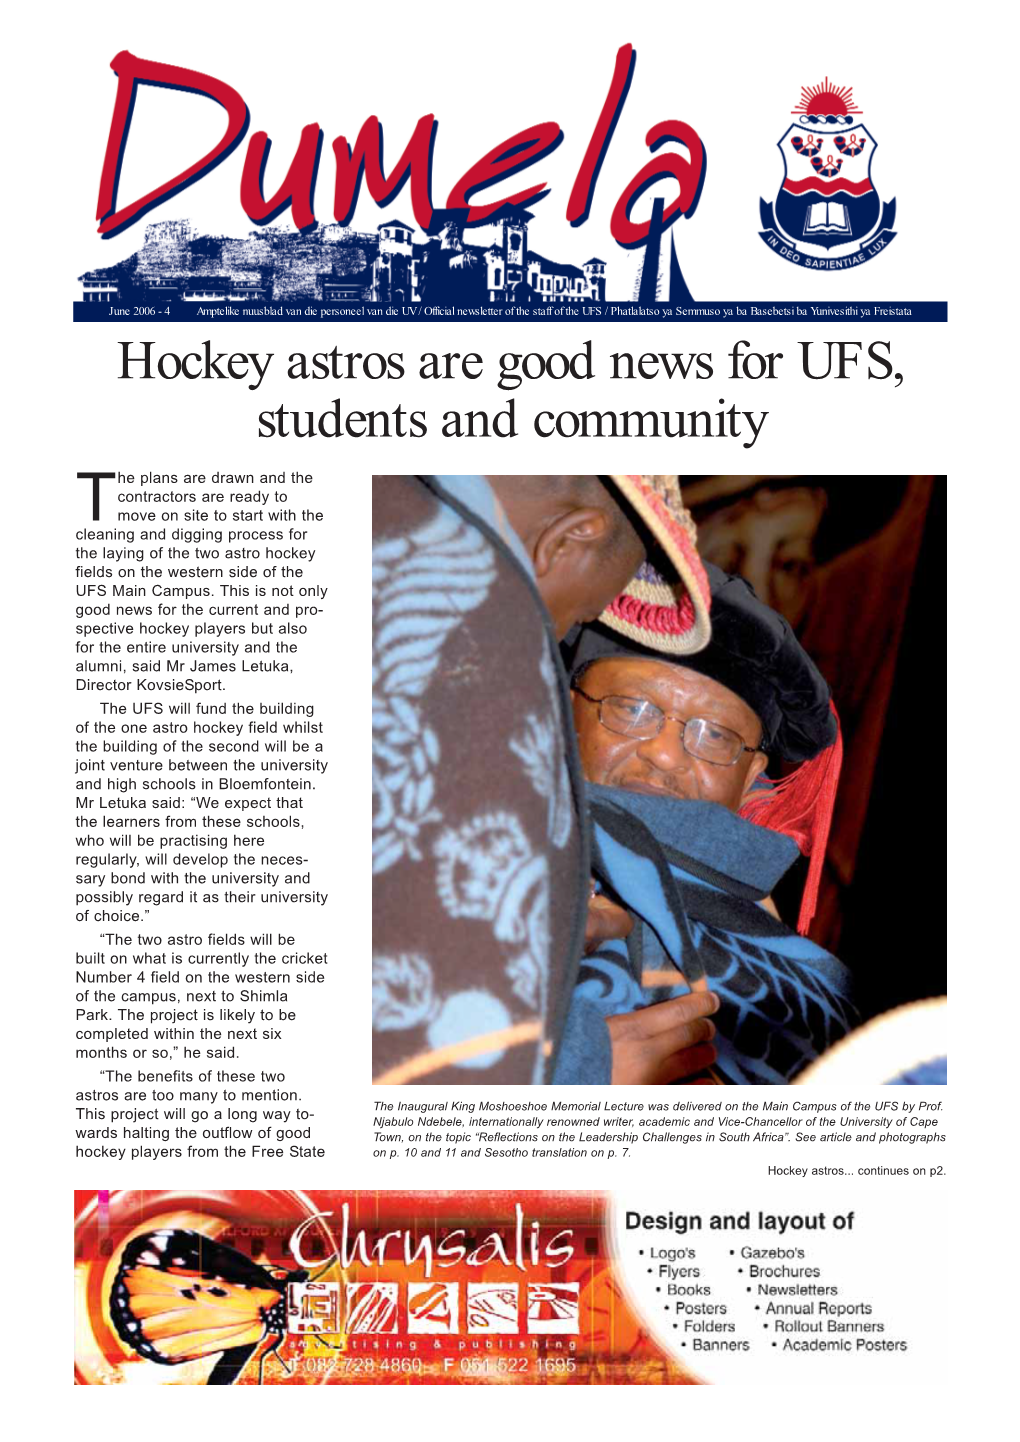 Hockey Astros Are Good News for UFS, Students and Community